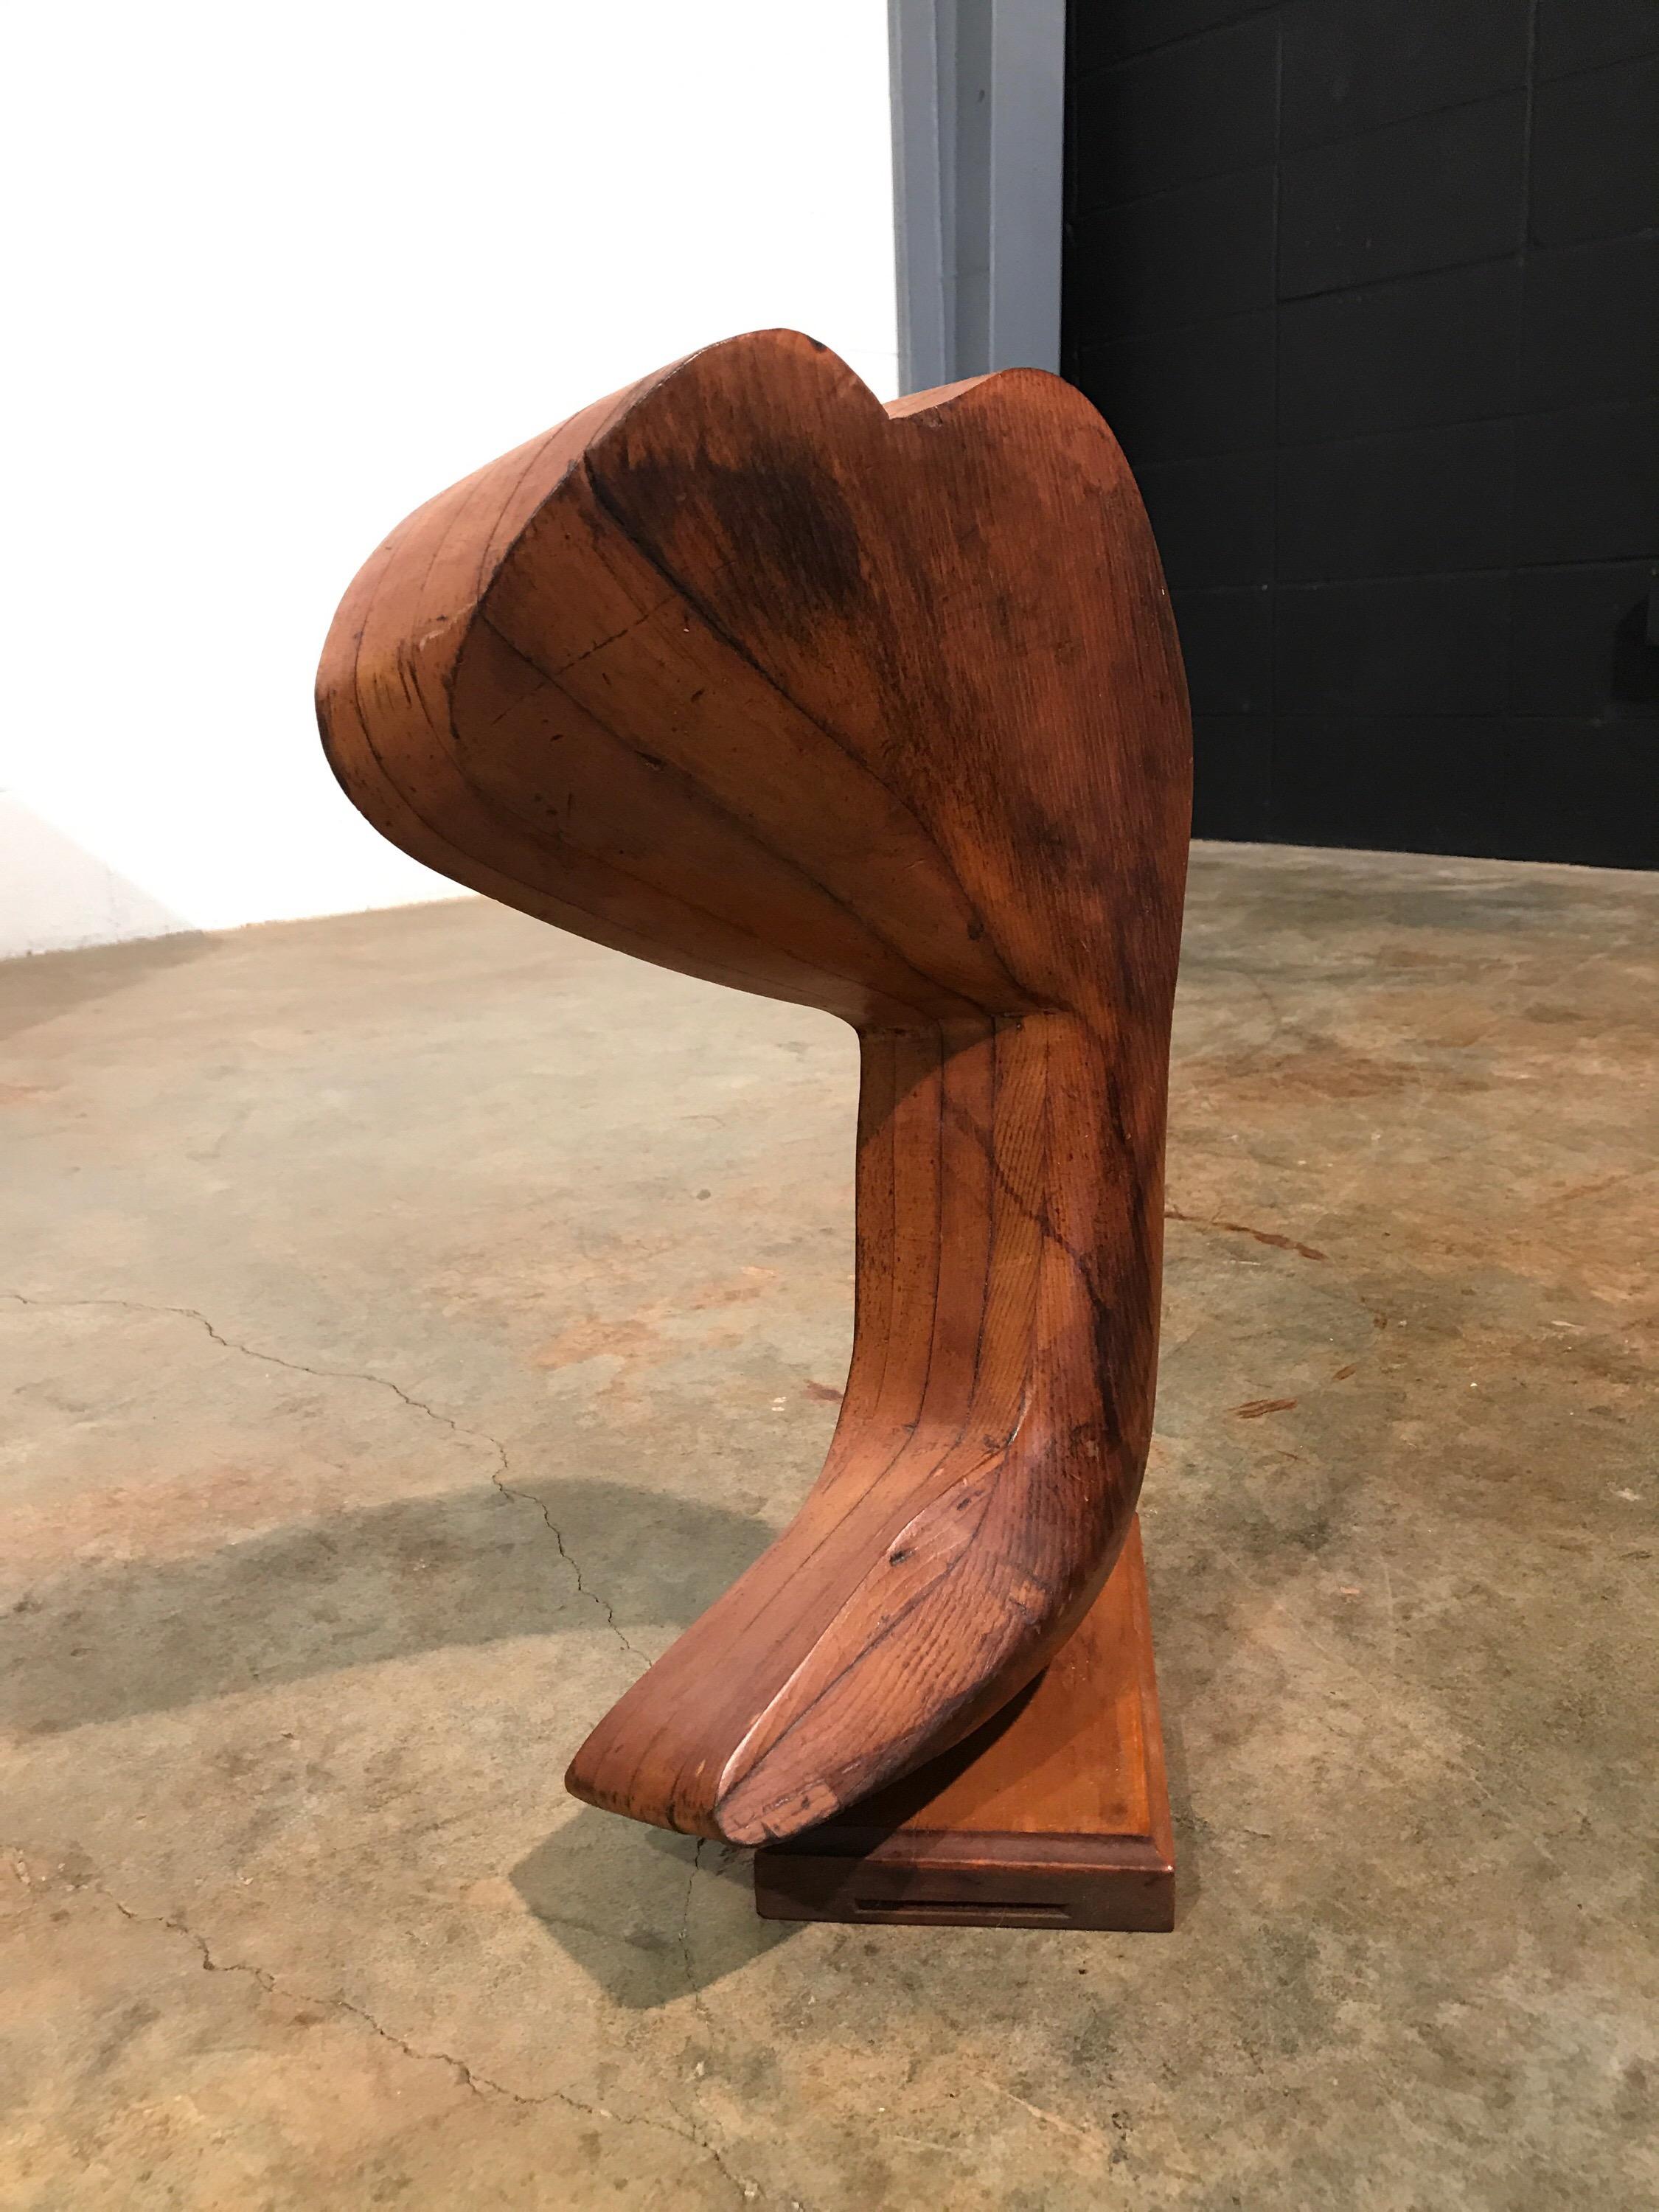 Early Modern Wood Sculpture Artist Signed L Ryan 1951, Rogue Wave, Vintage For Sale 2